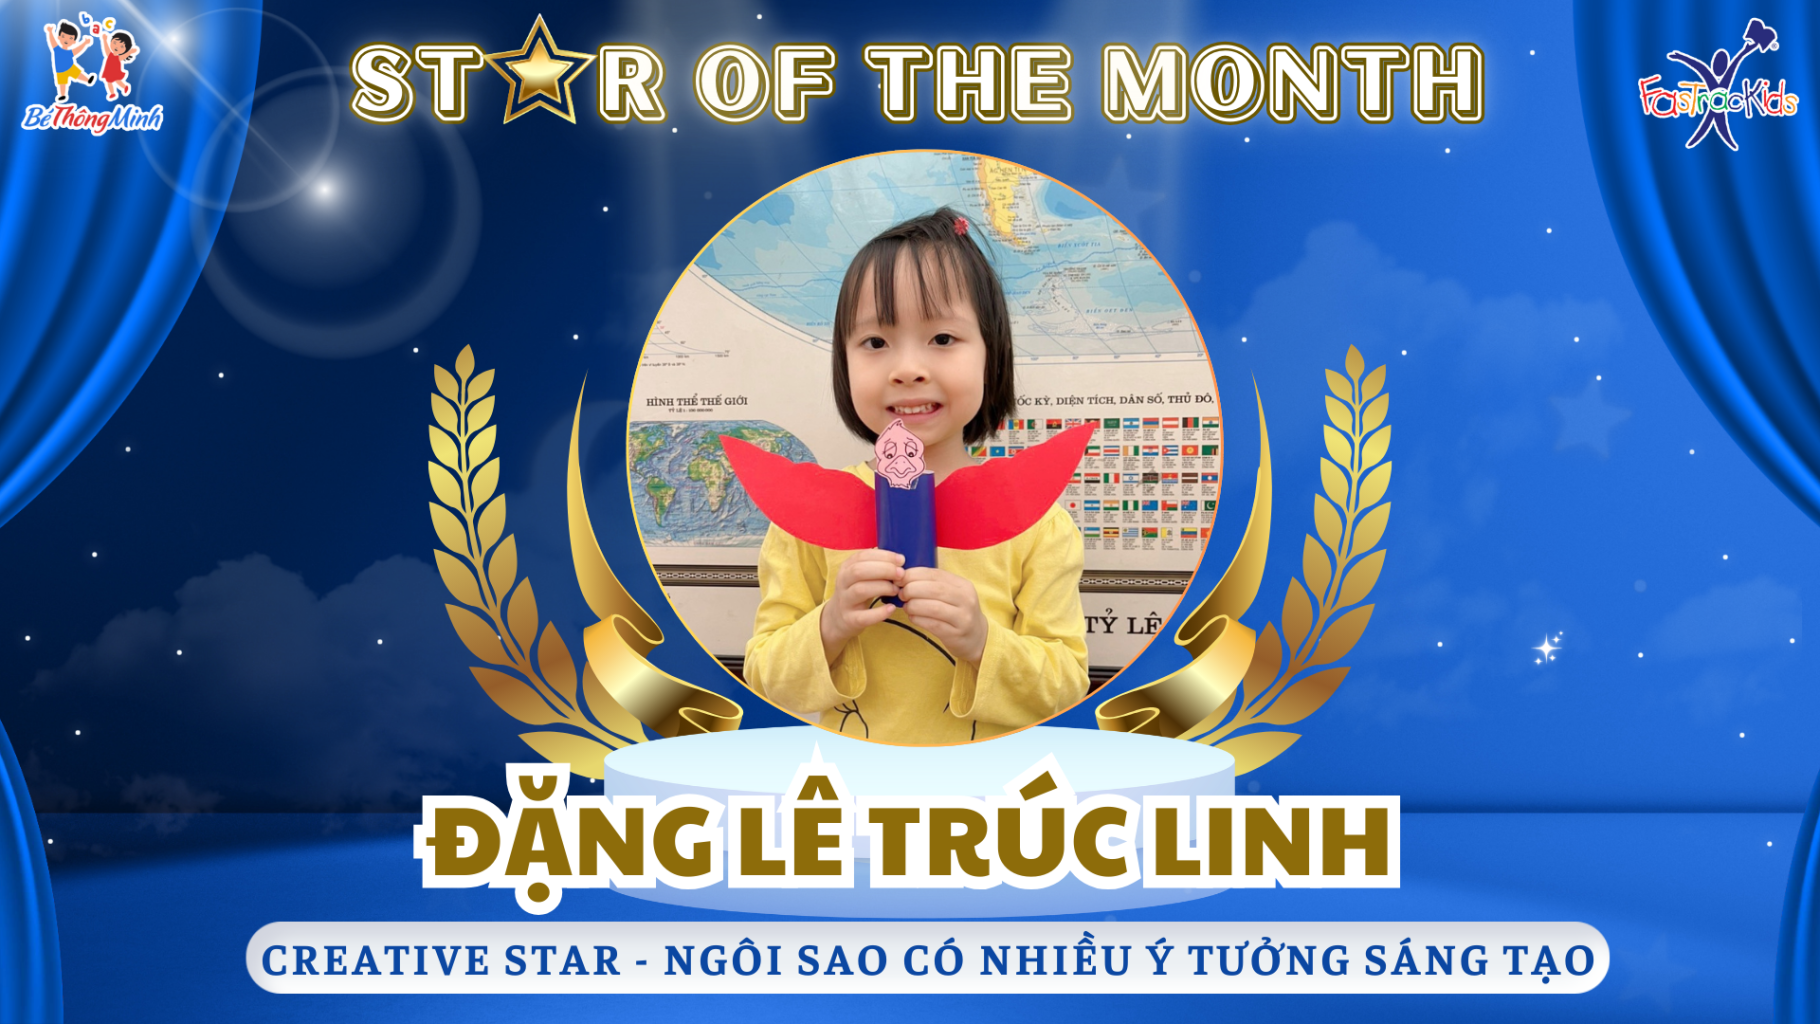 Creative Star of the Month May